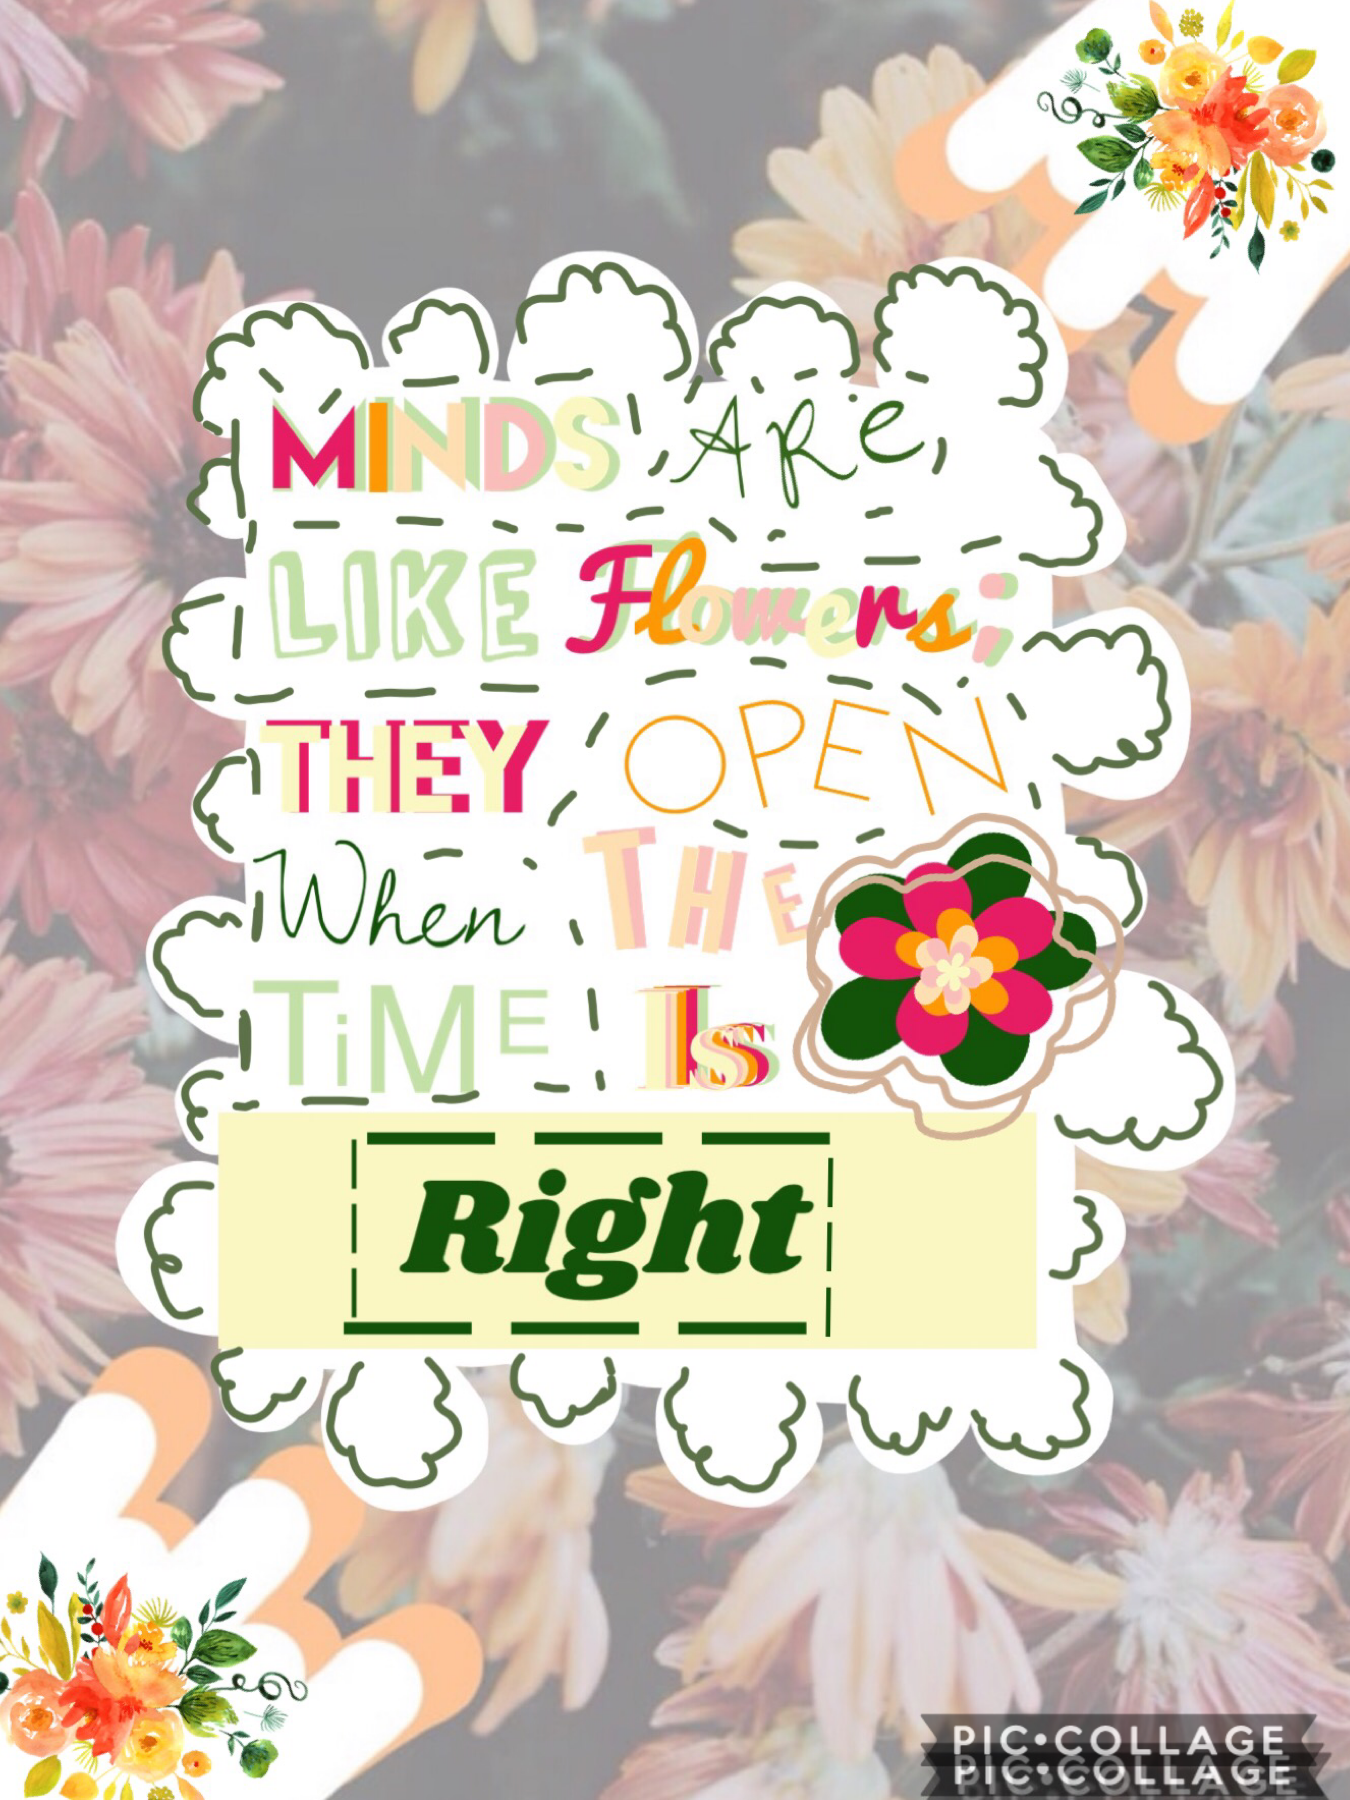 💐Collab with......
The amazing Ocean_Babe! She chose the flower bg and I did the quote, pngs and stuff. She is she is so kind and one of the nicest people ever guys! Please go follow her!☺️💕